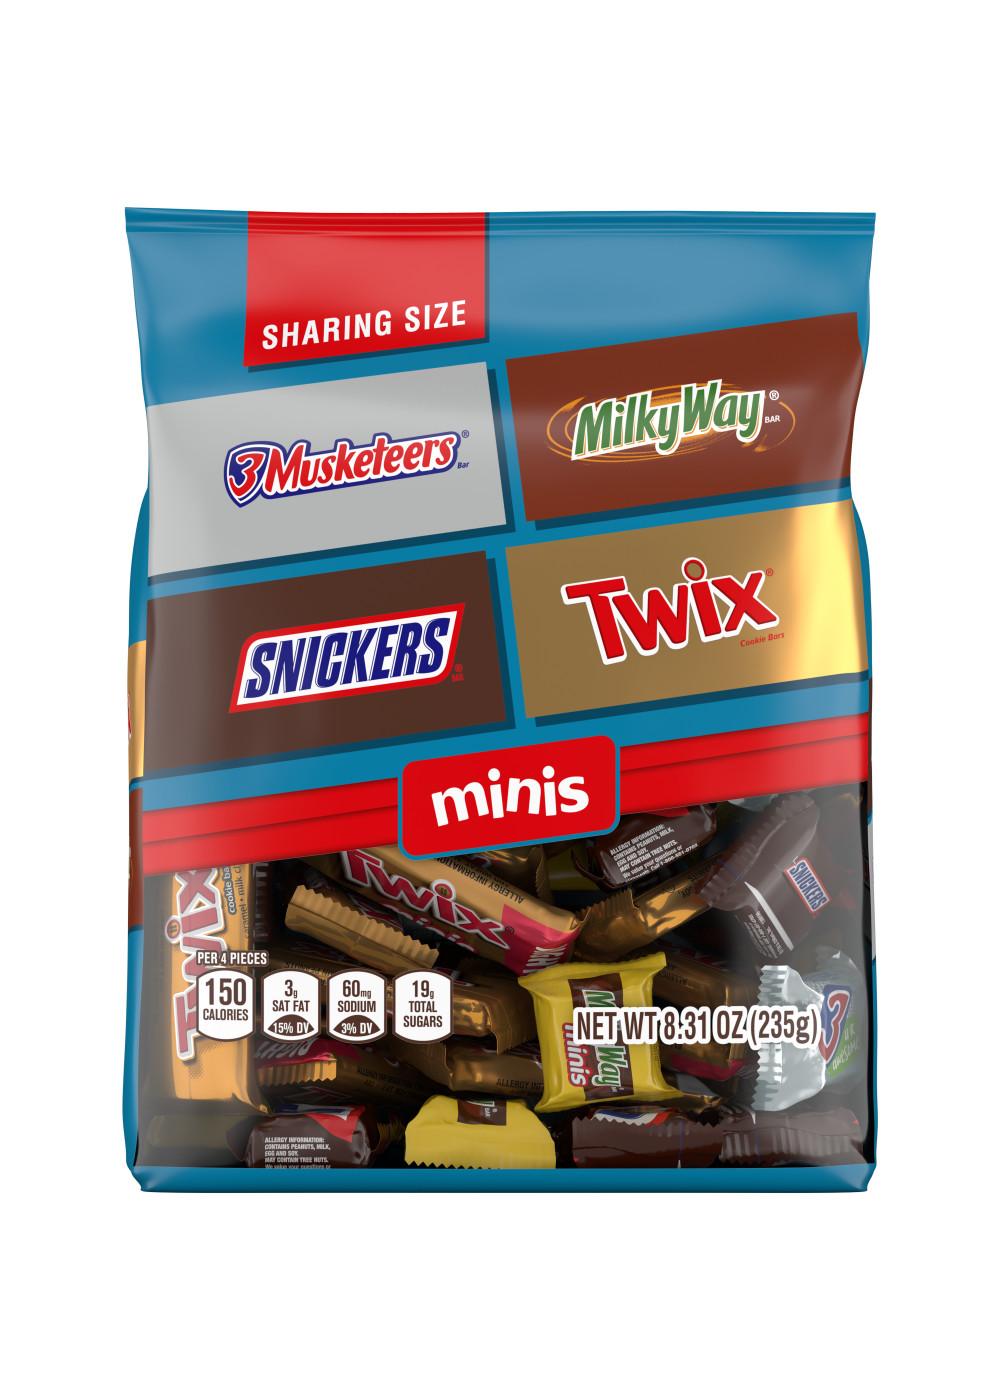 Snickers, Twix, Milky Way, & 3 Musketeers Assorted Minis Chocolate Candy - Sharing Size; image 1 of 7